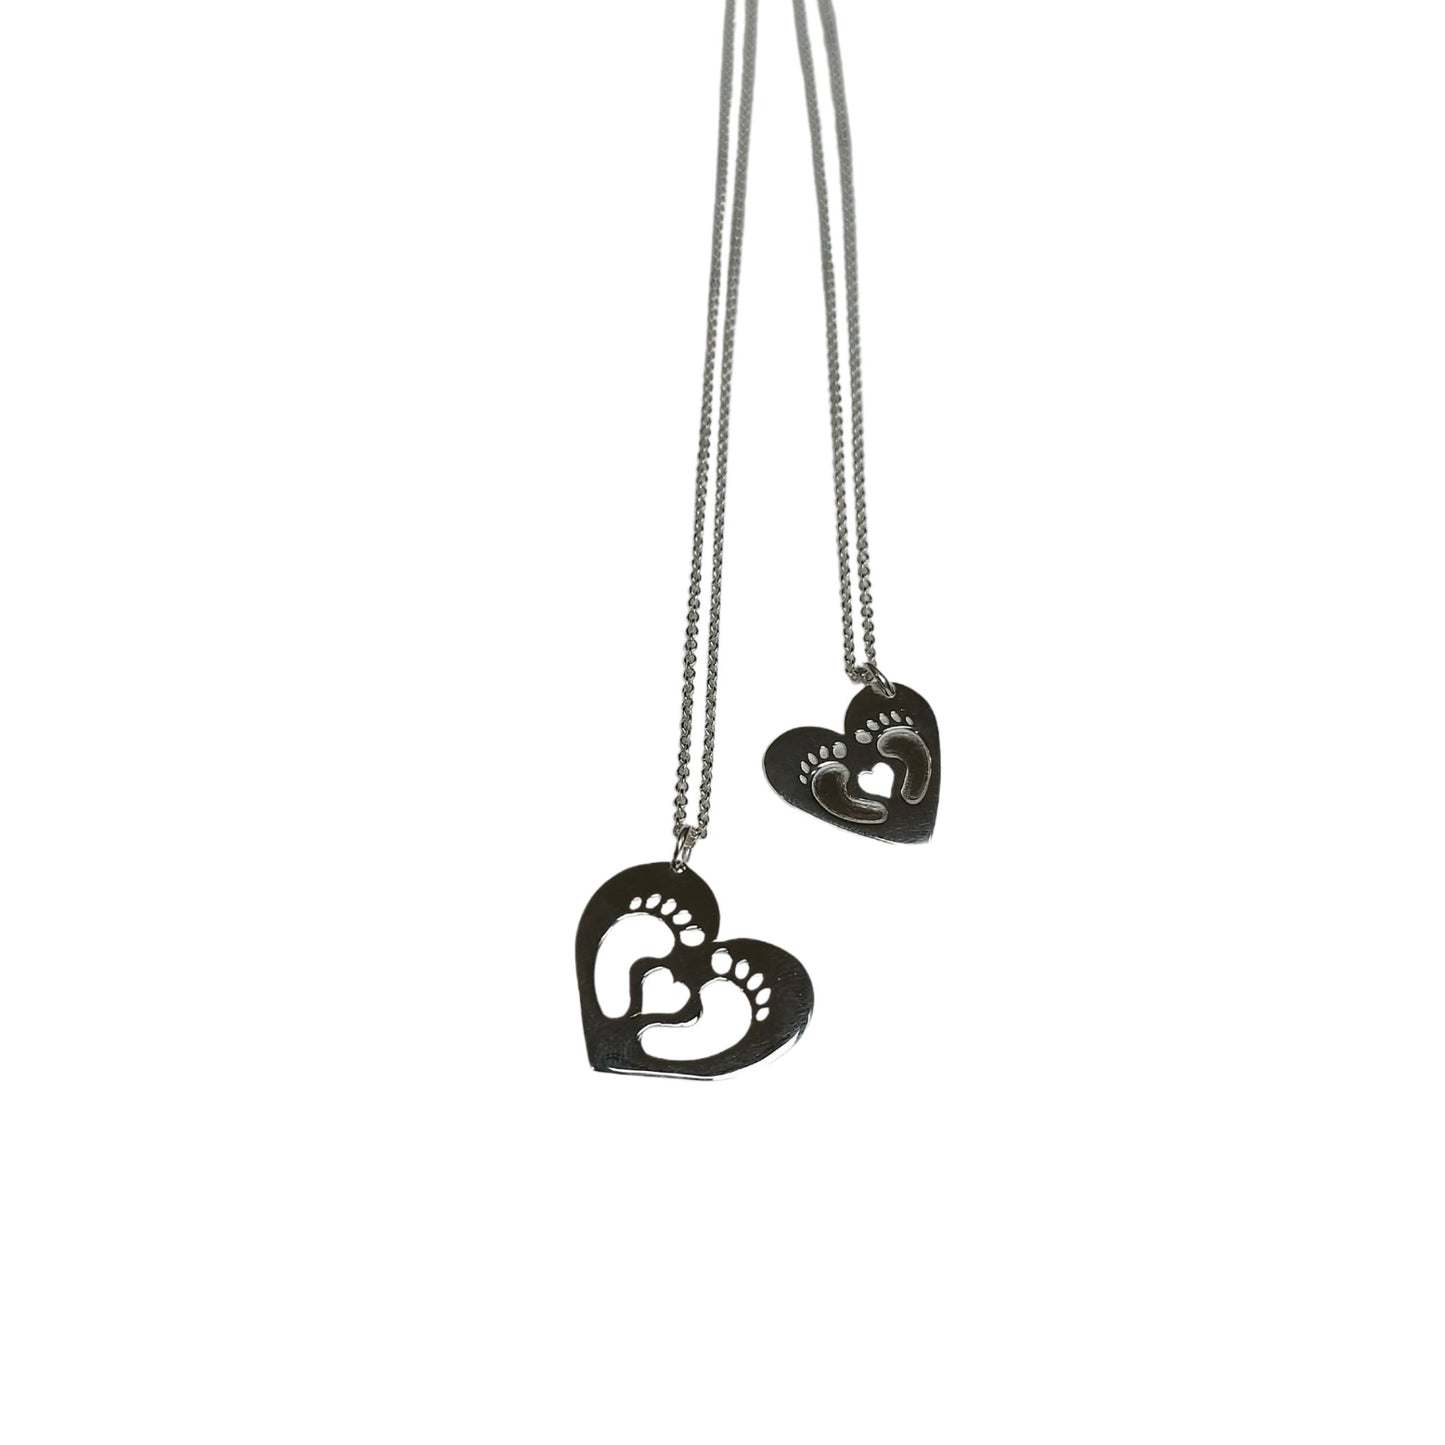 Two club foot inspired heart necklaces both showing tiny curled feet inside a heart.